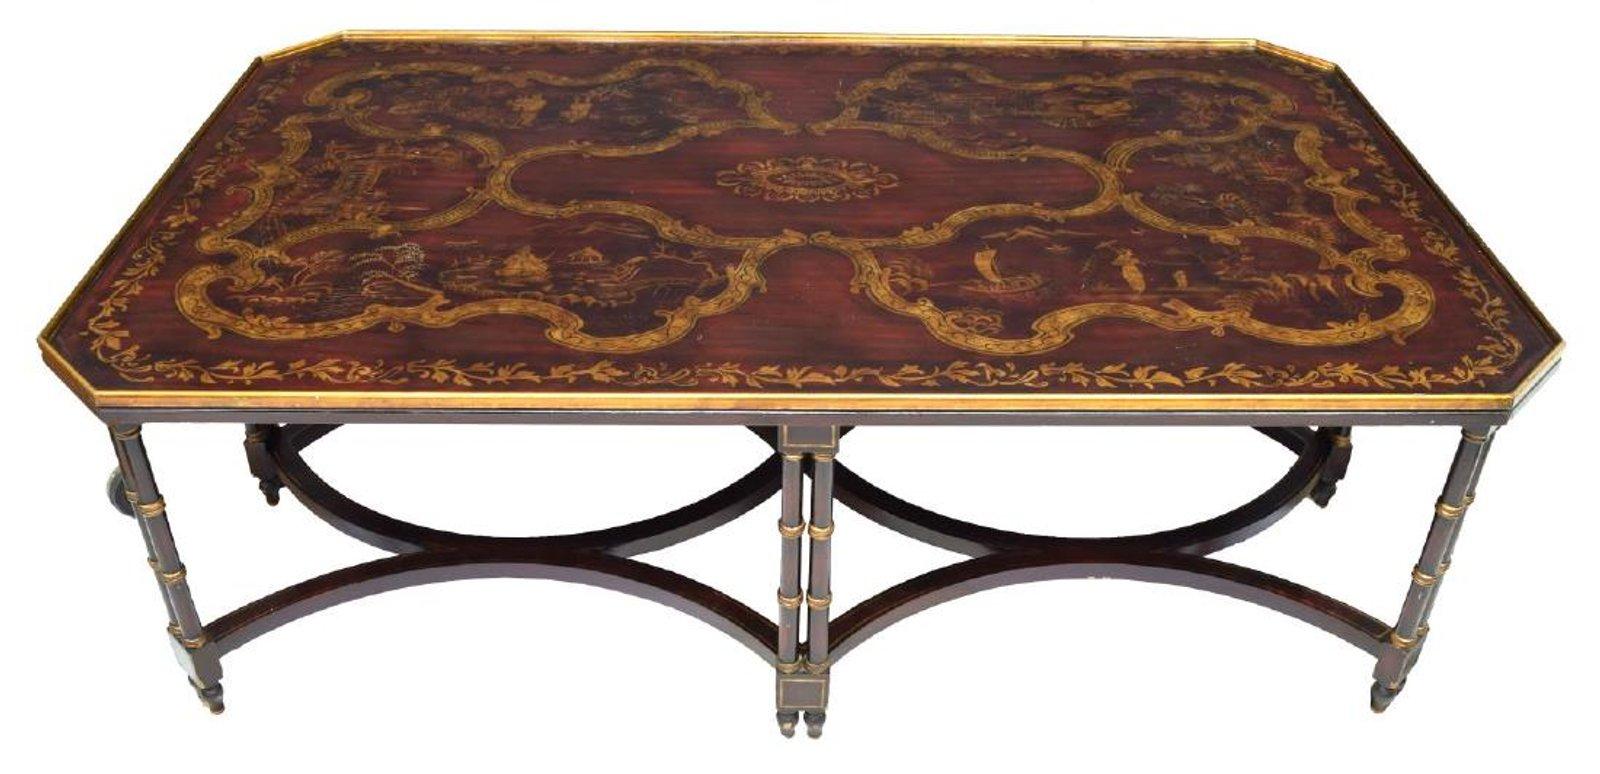 An oversized chinoiserie paint decorated coffee or cocktail table with faux bamboo legs and canted corners.